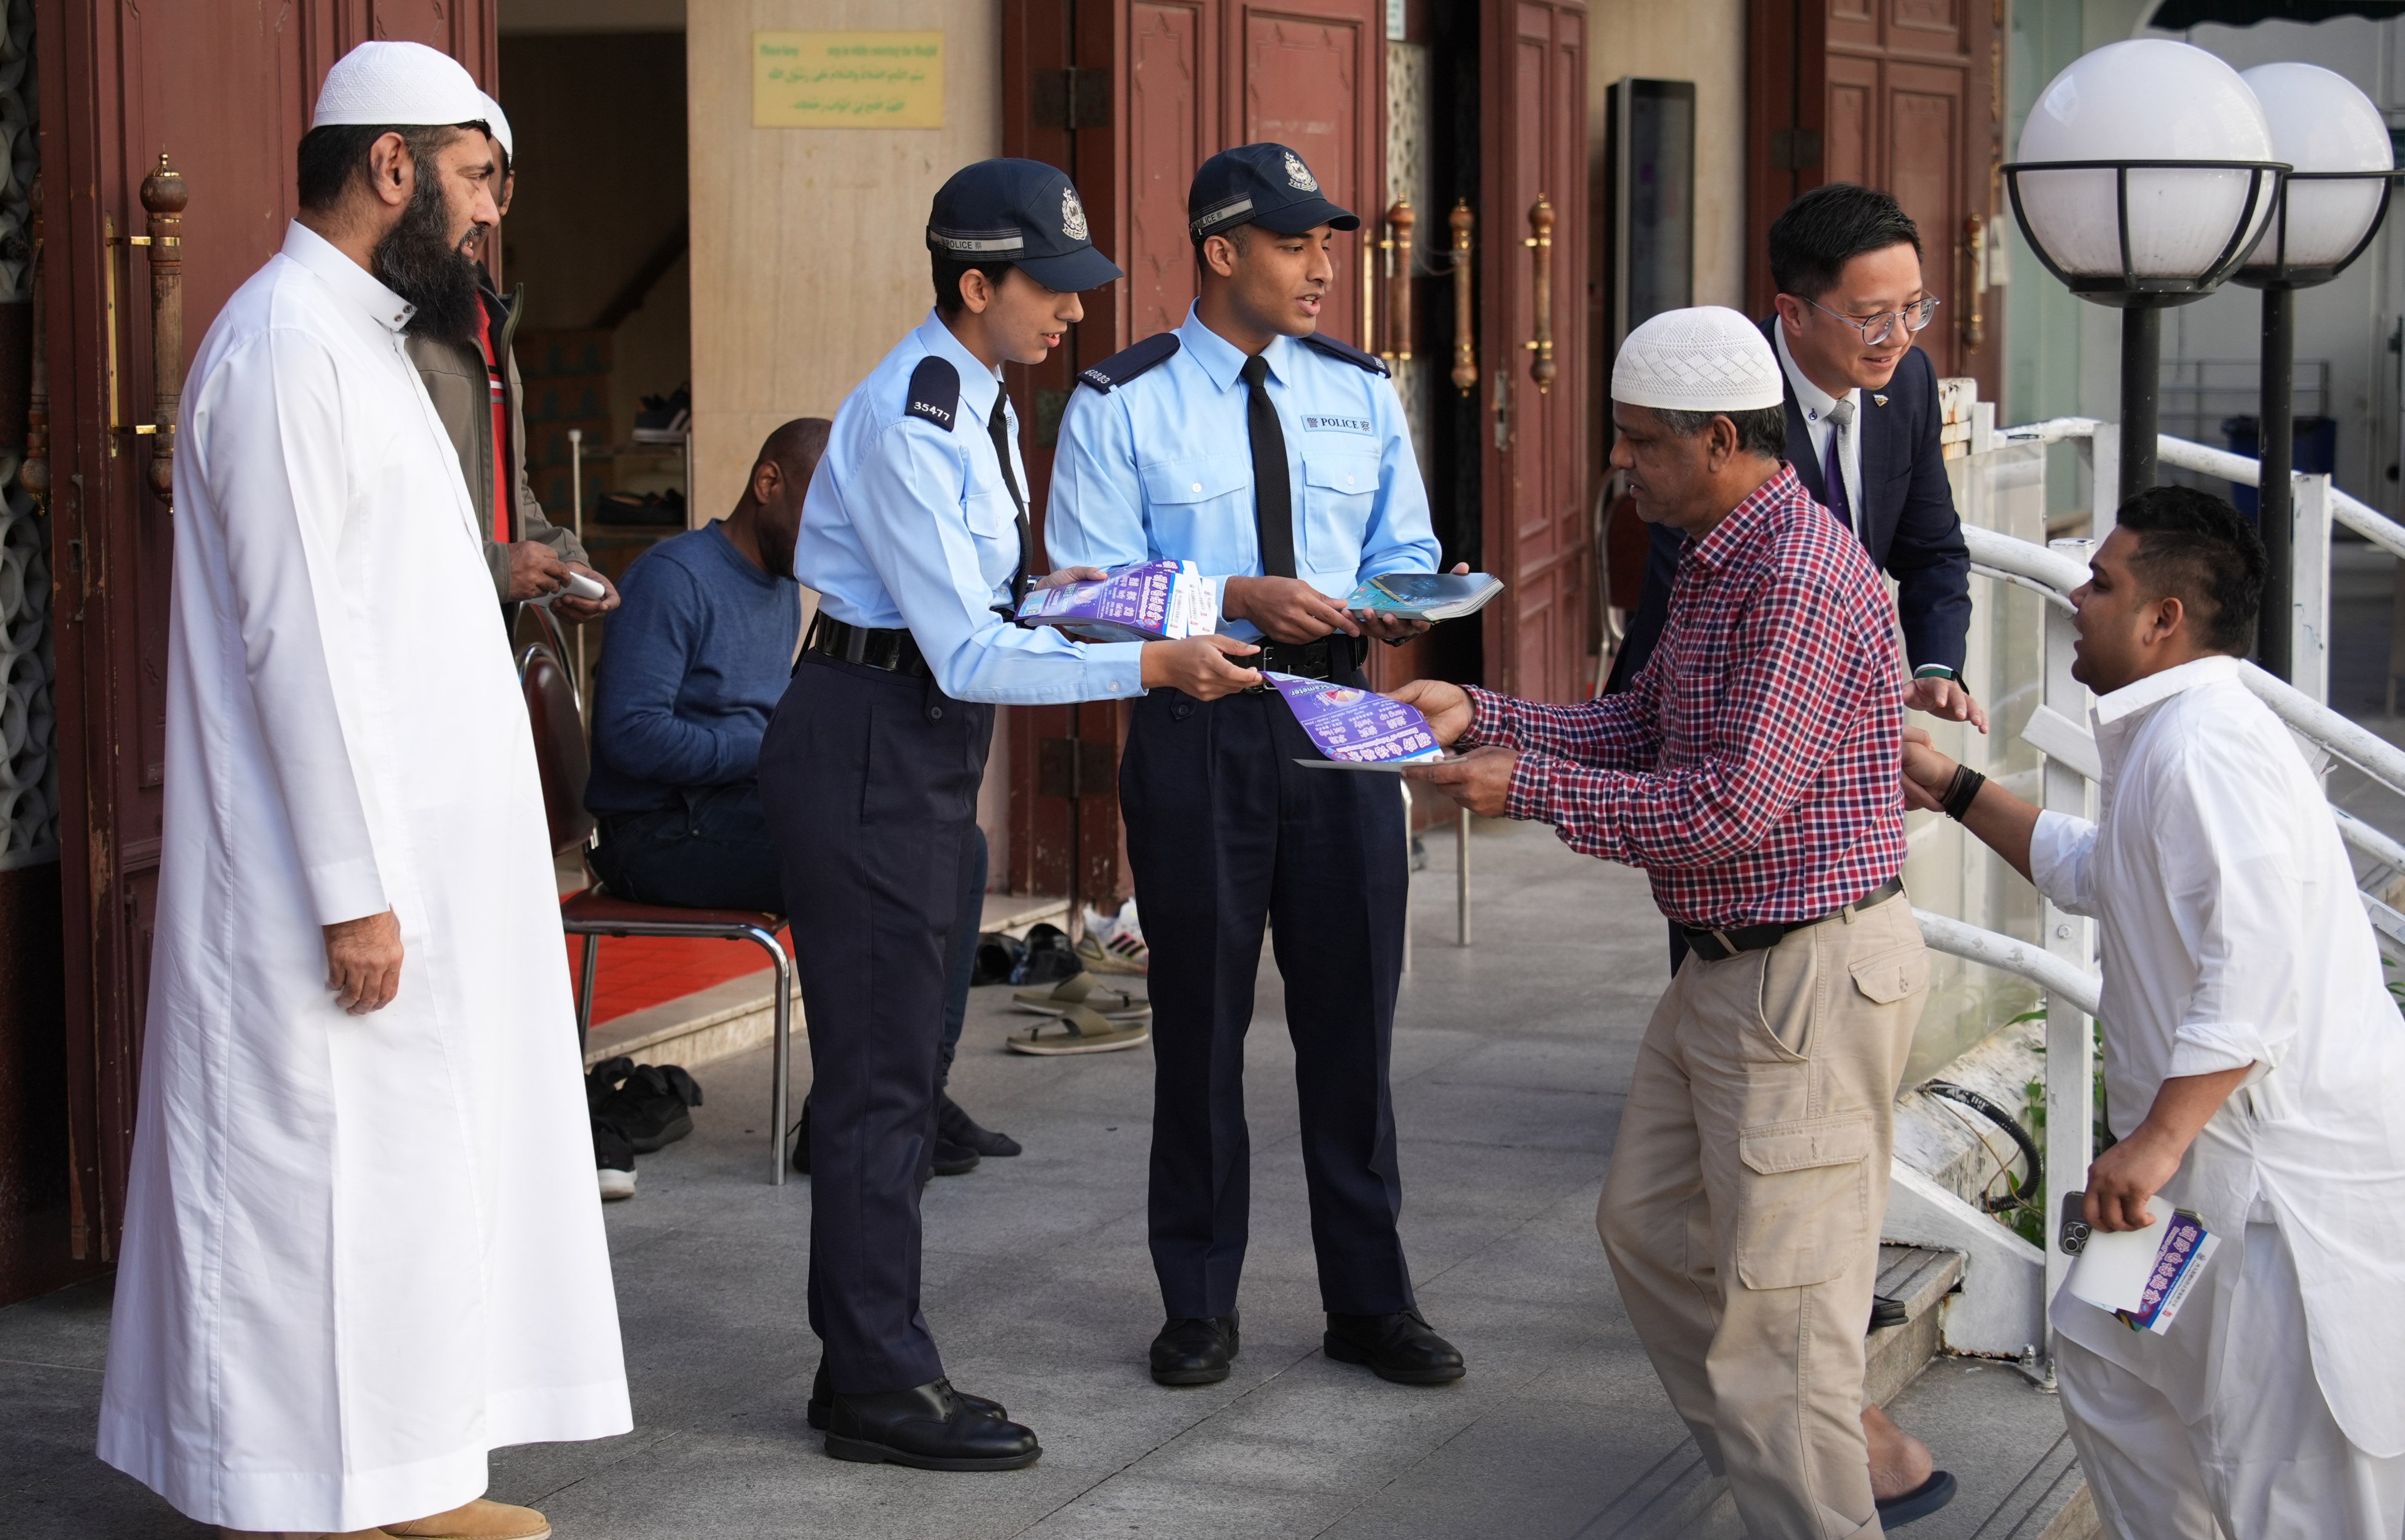 Constables Adnan Mohammad (third left) and Salma Bibi (second left) distribute anti-scam leaflets in Kowloon. They are among the more than 150 officers from an ethnic minority background. Photo: Eugene Lee